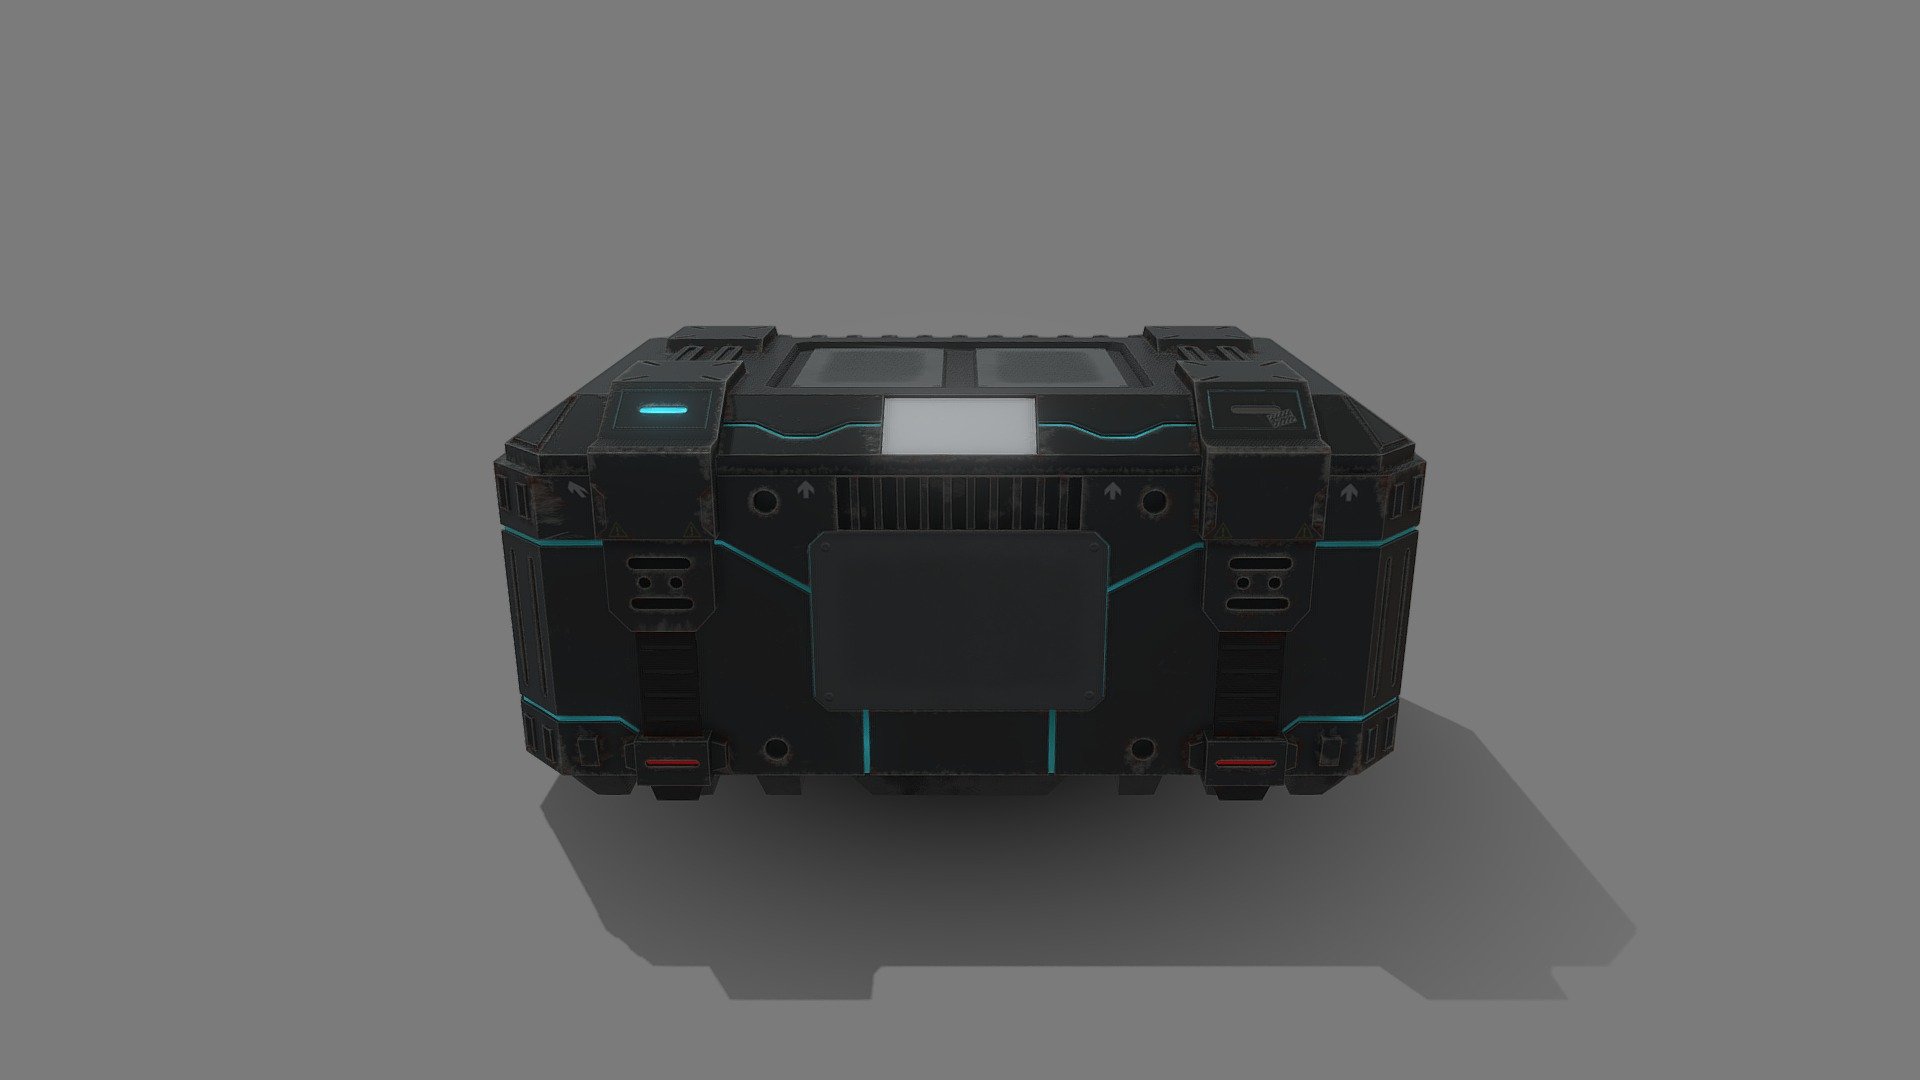 The second model for my upcoming asset pack. It's a futuristic cargo crate with a lot of wearing on it.
Made the model in Maya, and the textures in Substance Painter.

Let me know what you think about it! - A3AN SAFEBOX.2 - 3D model by A3AN 3d model